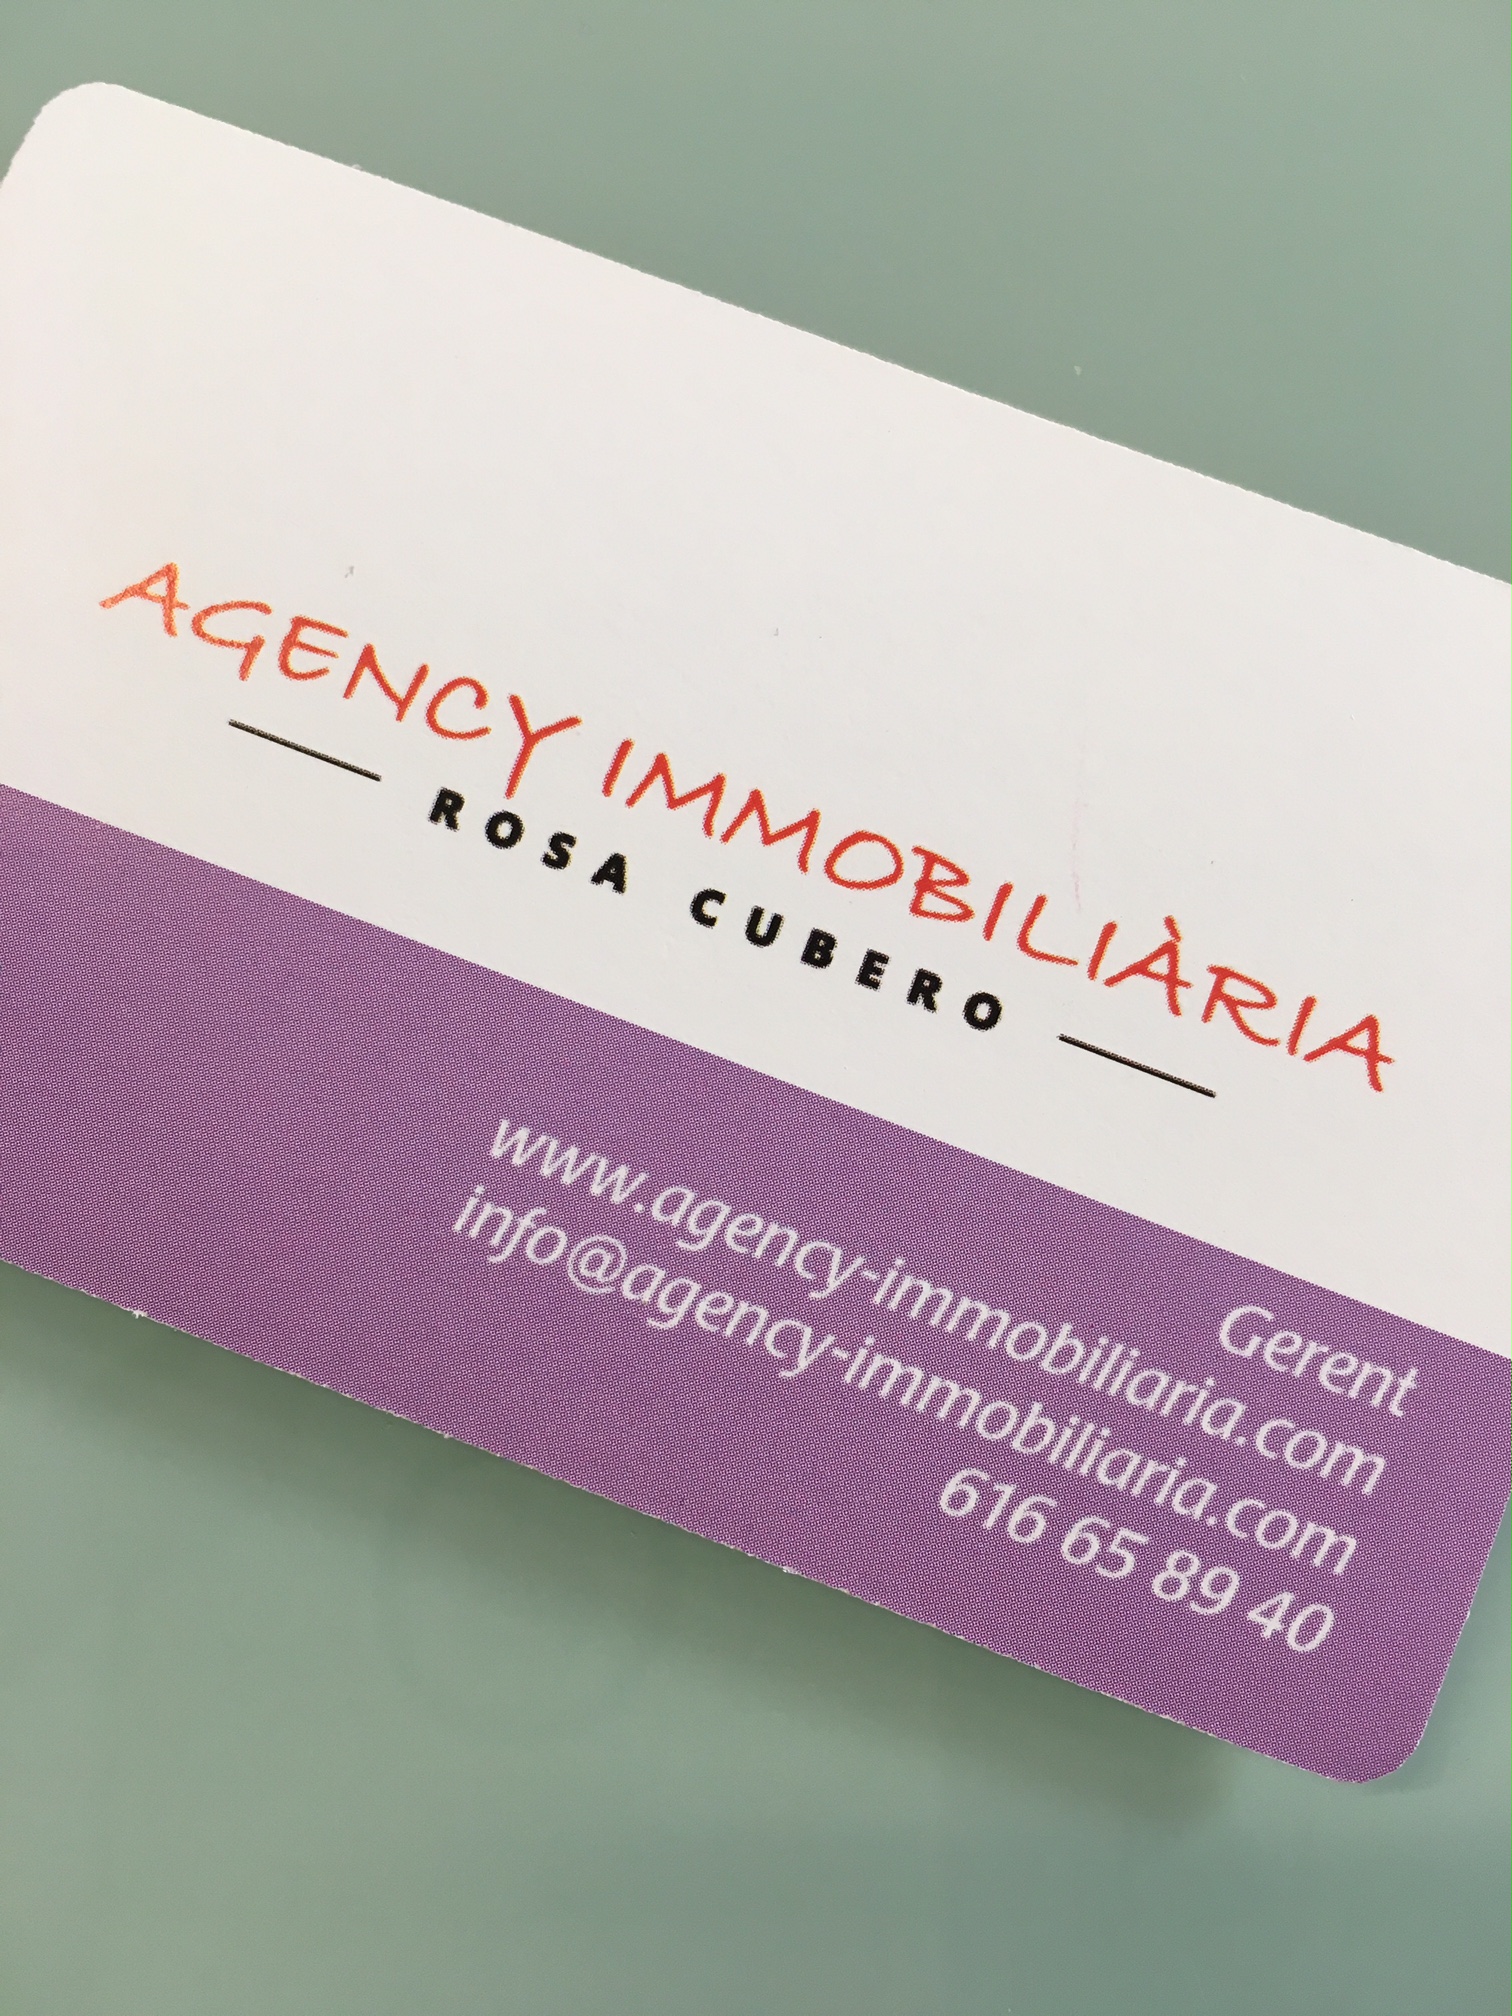 AGENCY IMMOBILIARIA